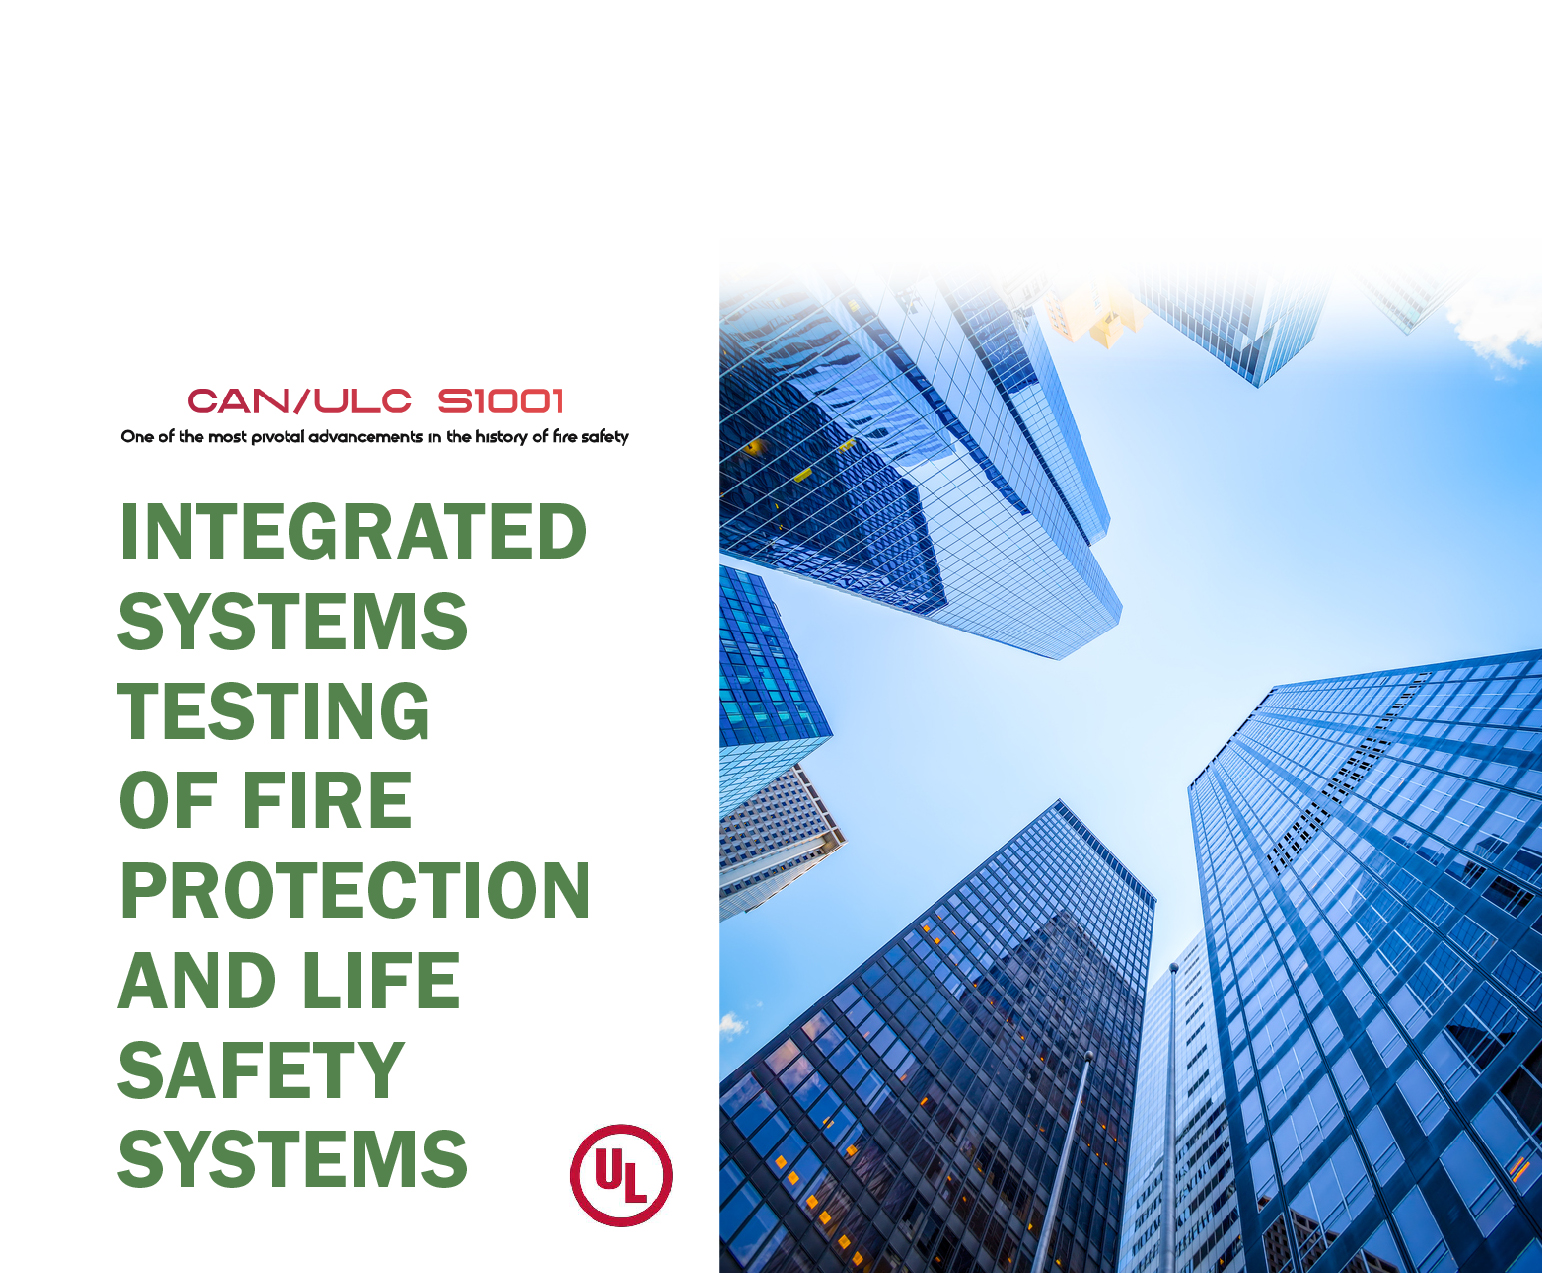 Completion of Level 4 complexity validation under the CAN/ULC-S1001 Integrated Fire Protection and Life Safety Systems standards